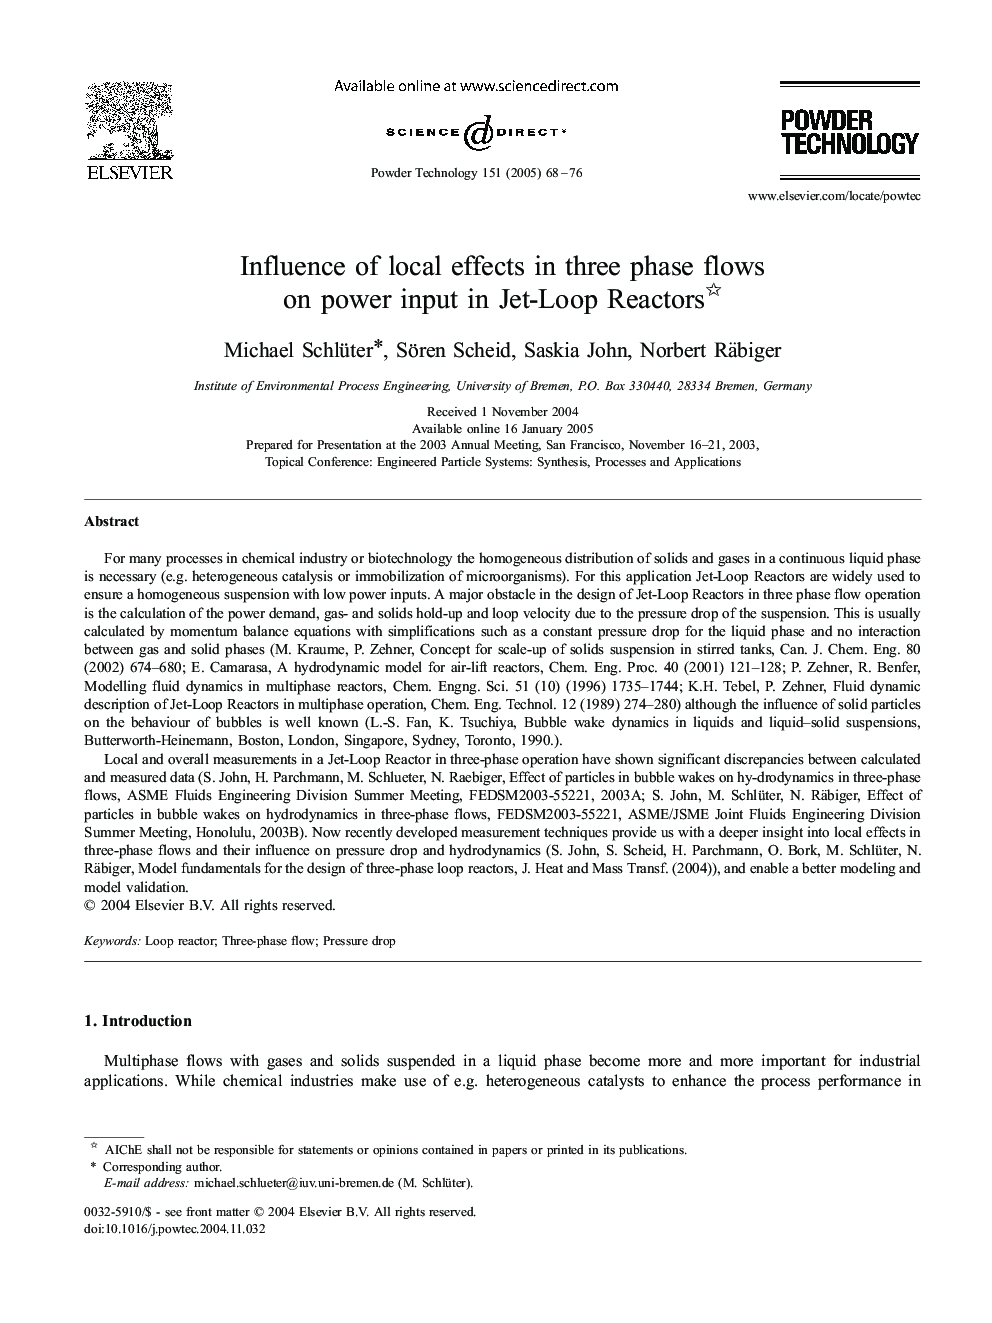 Influence of local effects in three phase flows on power input in Jet-Loop Reactors